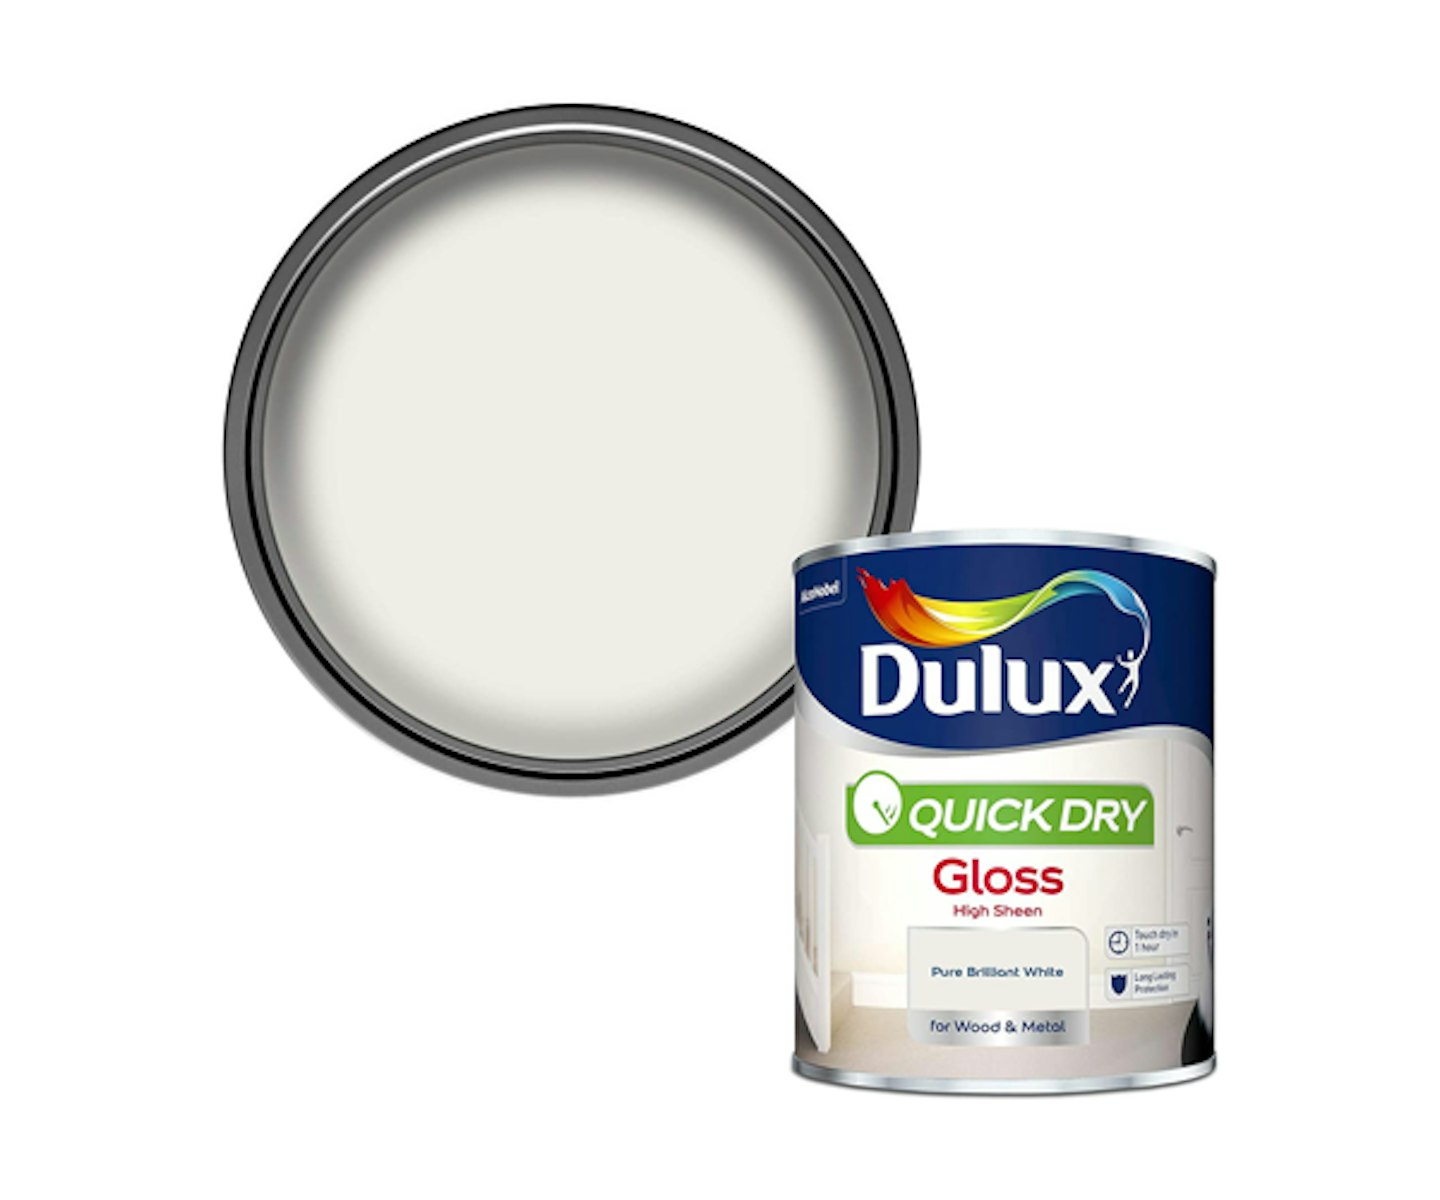 Dulux Quick Dry Gloss Paint